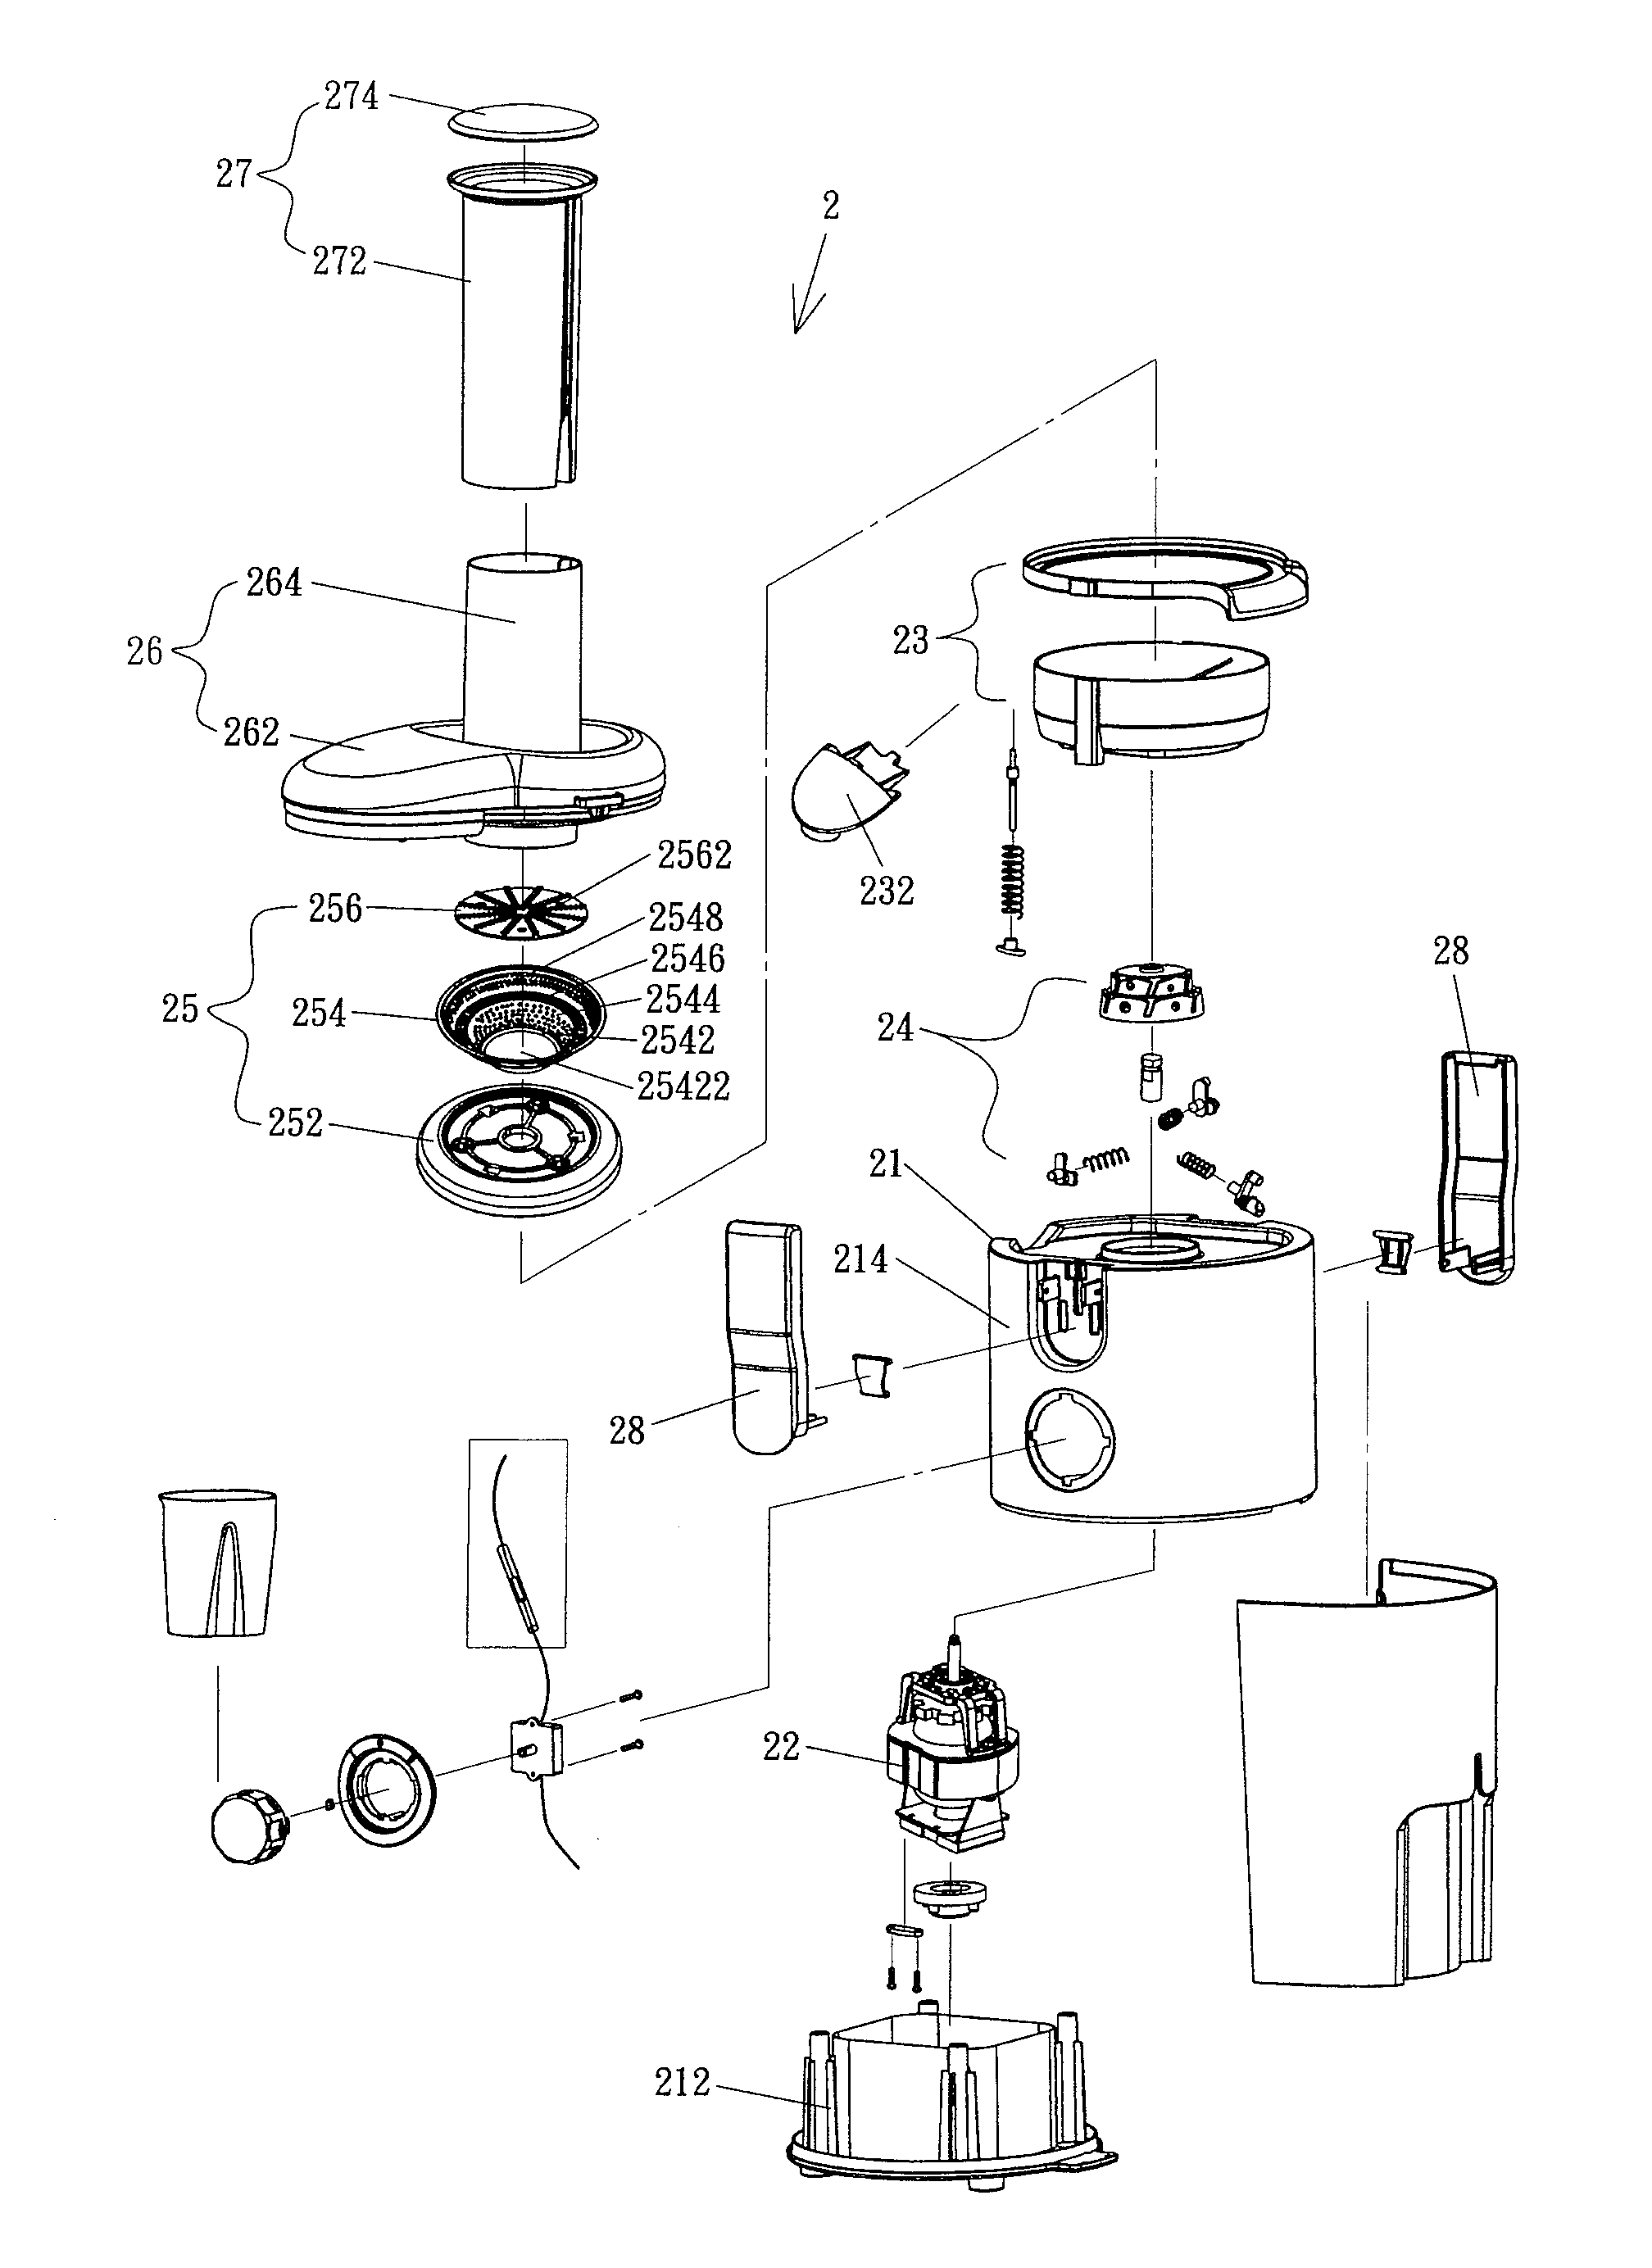 Juice Machine and Filter Thereof